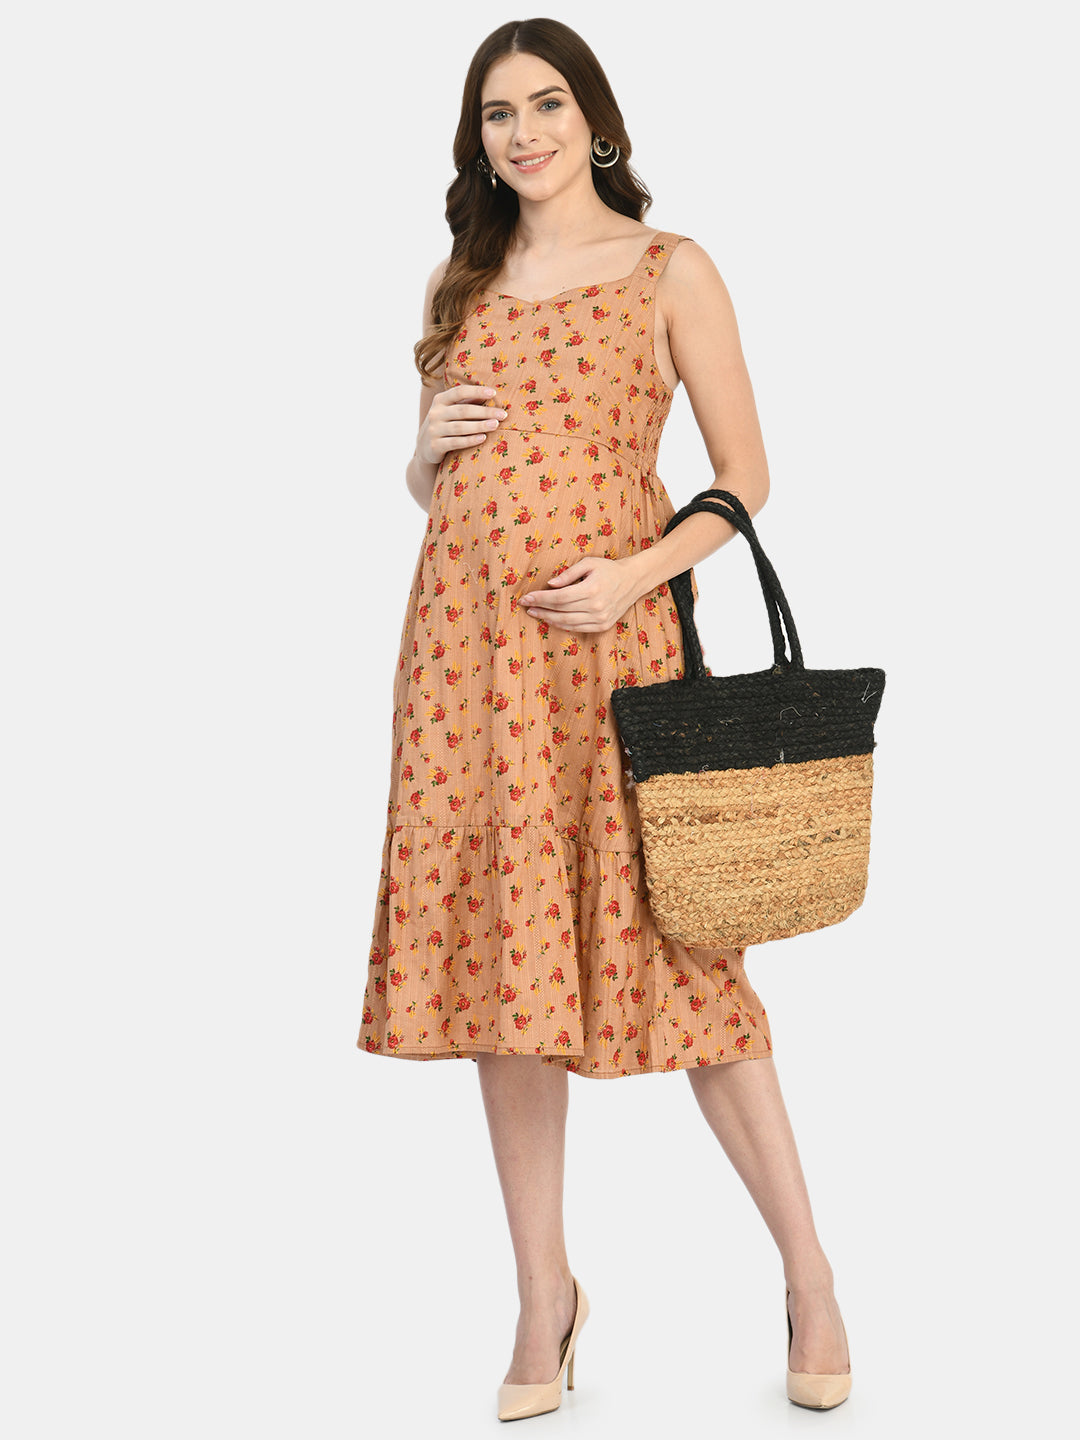 Brown Floral Maternity Dress